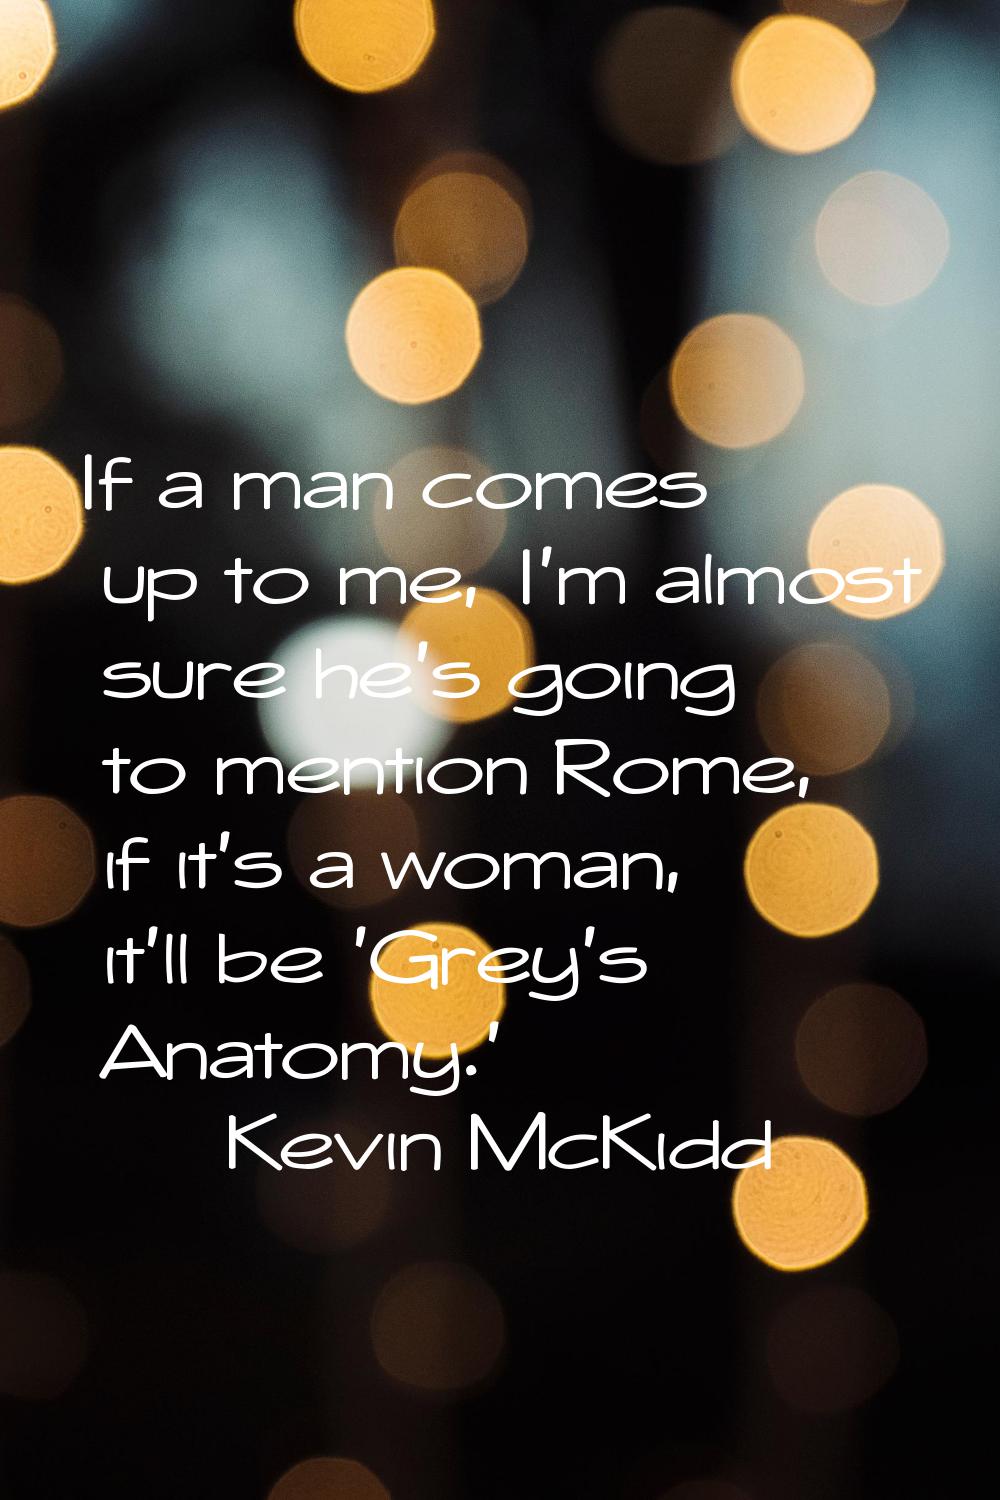 If a man comes up to me, I'm almost sure he's going to mention Rome, if it's a woman, it'll be 'Gre